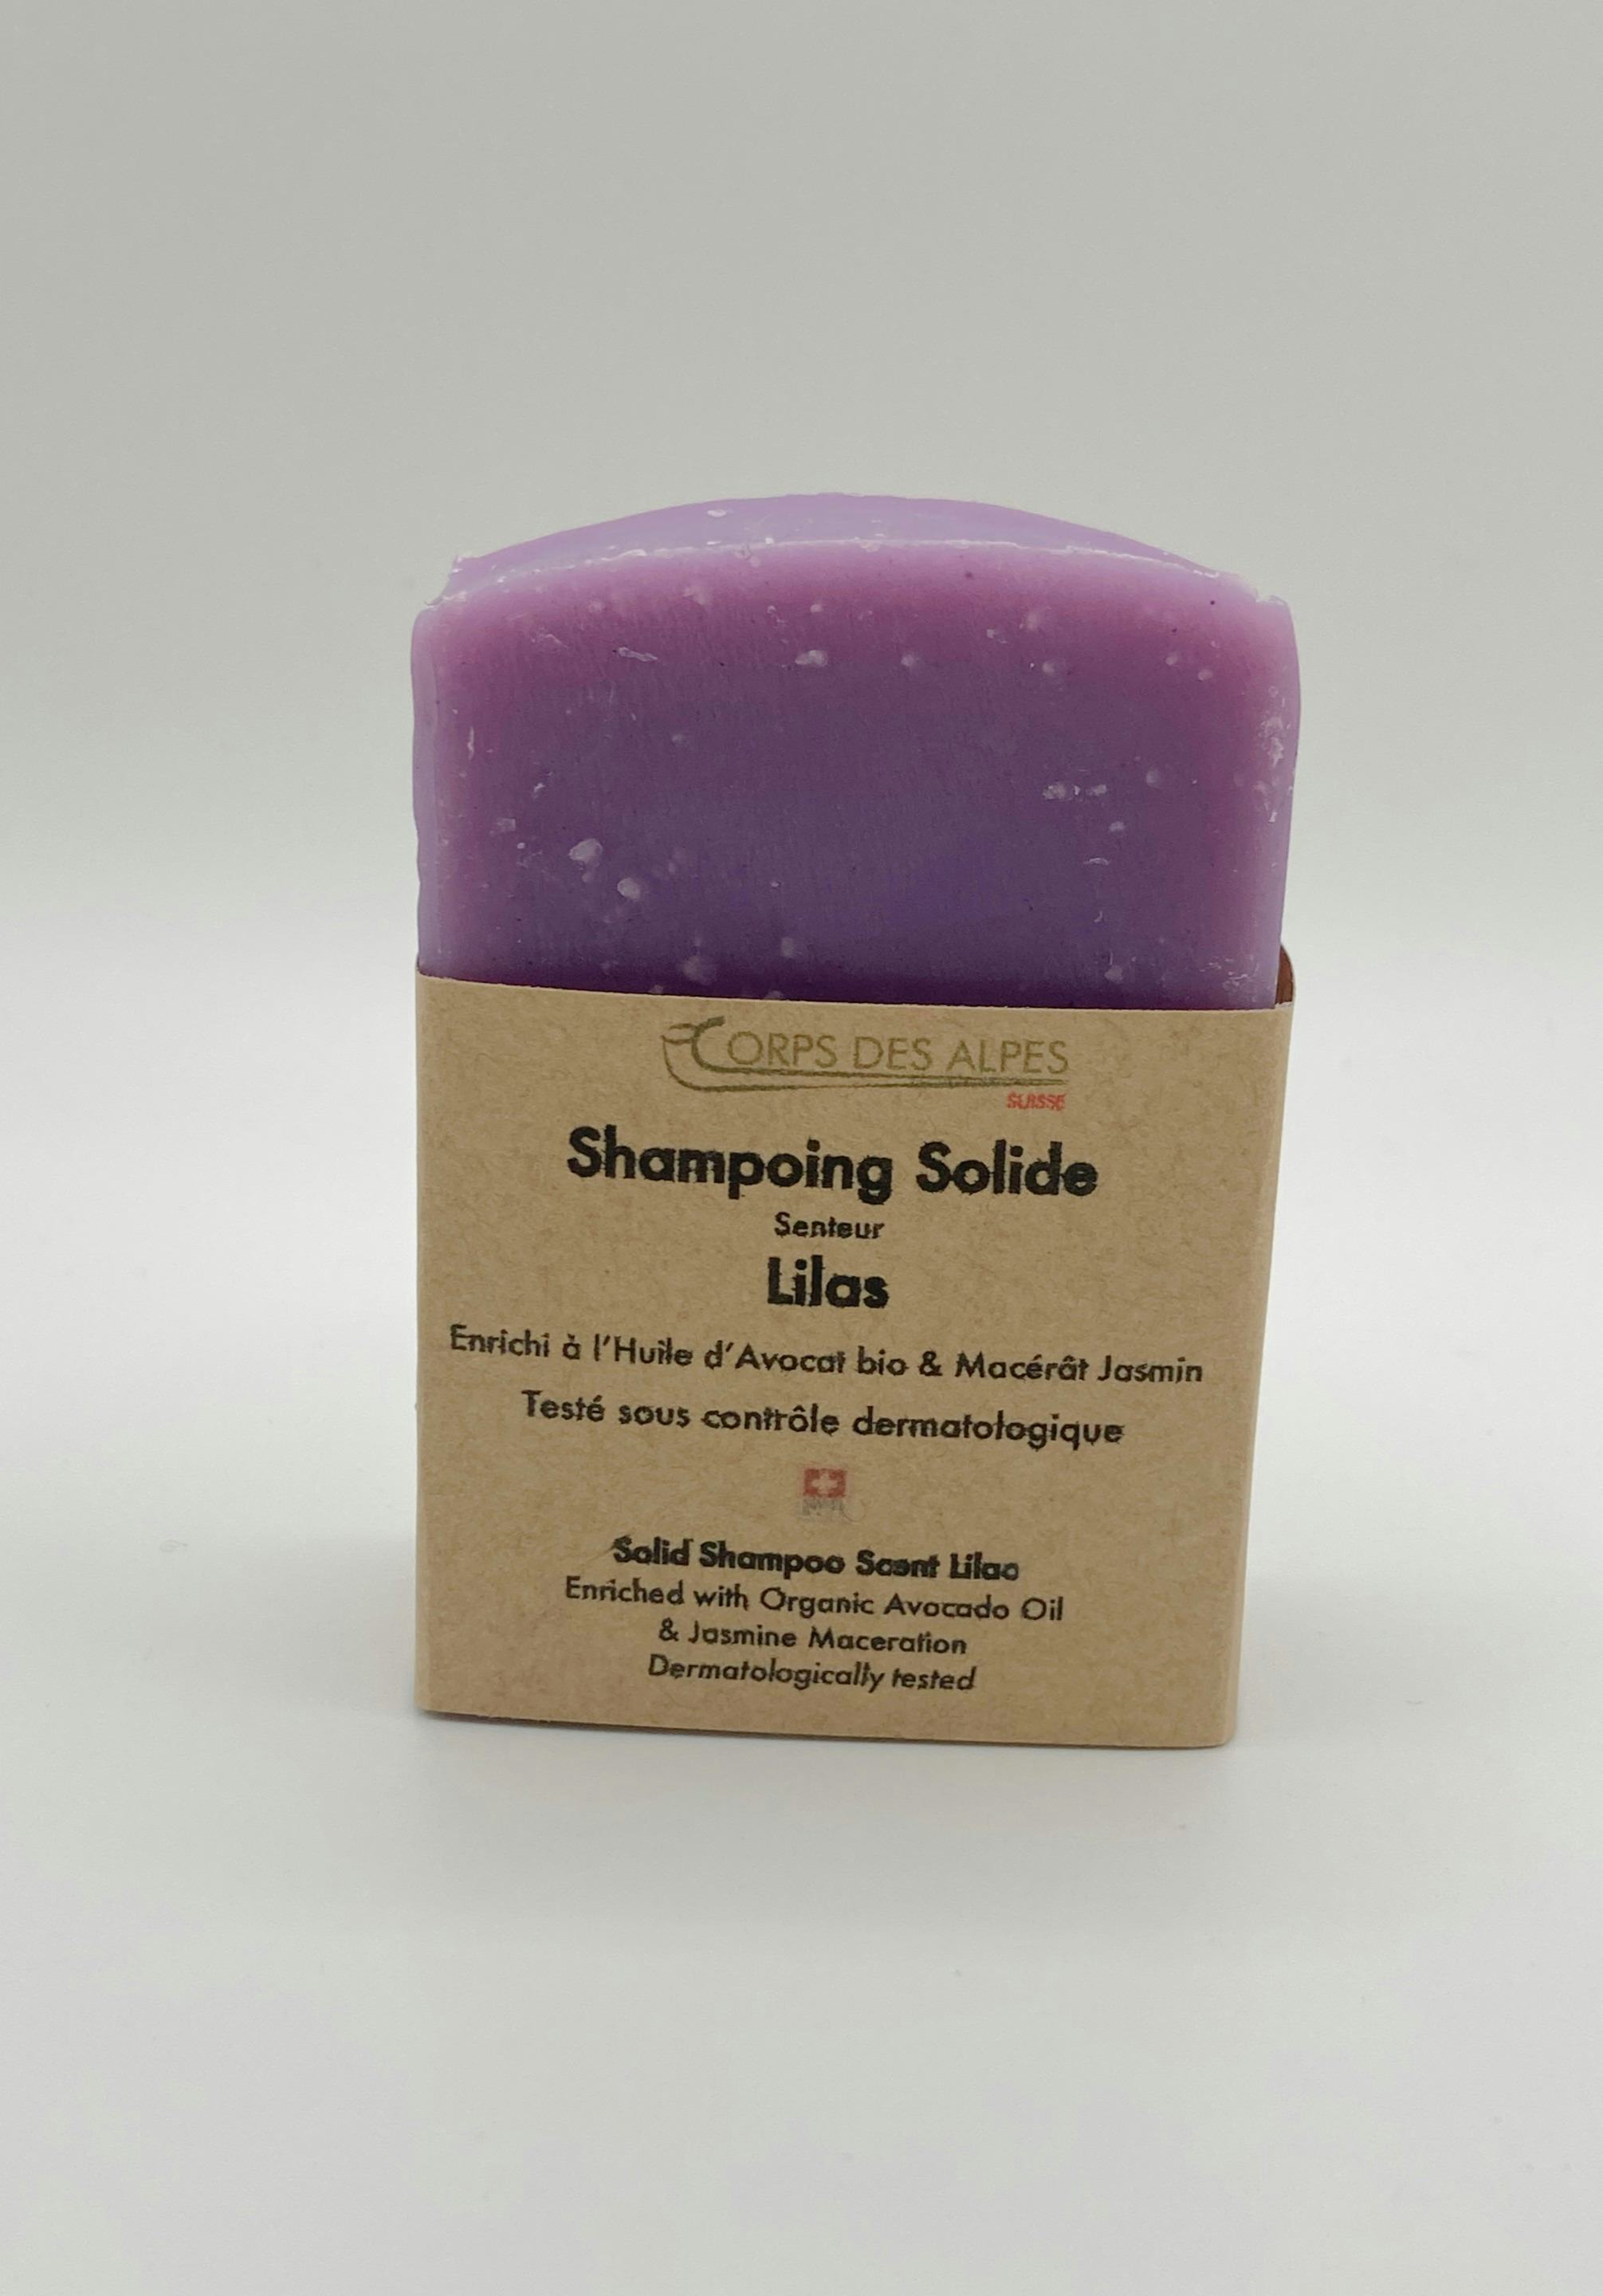 Shampoing solide senteur Lilas, artisanal product for direct sale in Switzerland